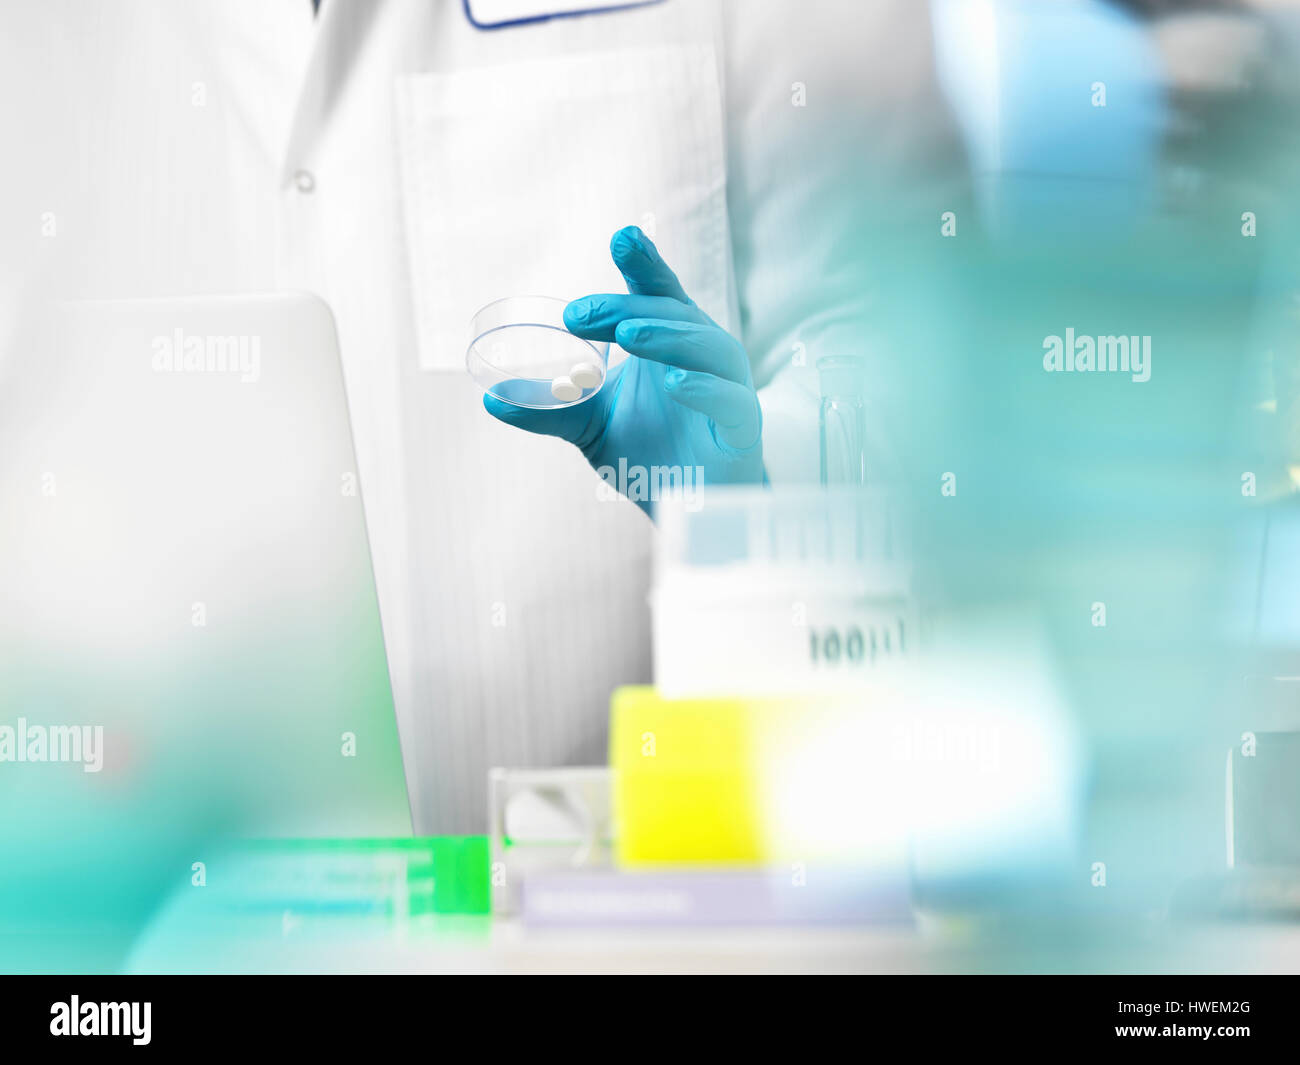 Clinical Trial, doctor preparing medicine for a medical trial Stock Photo